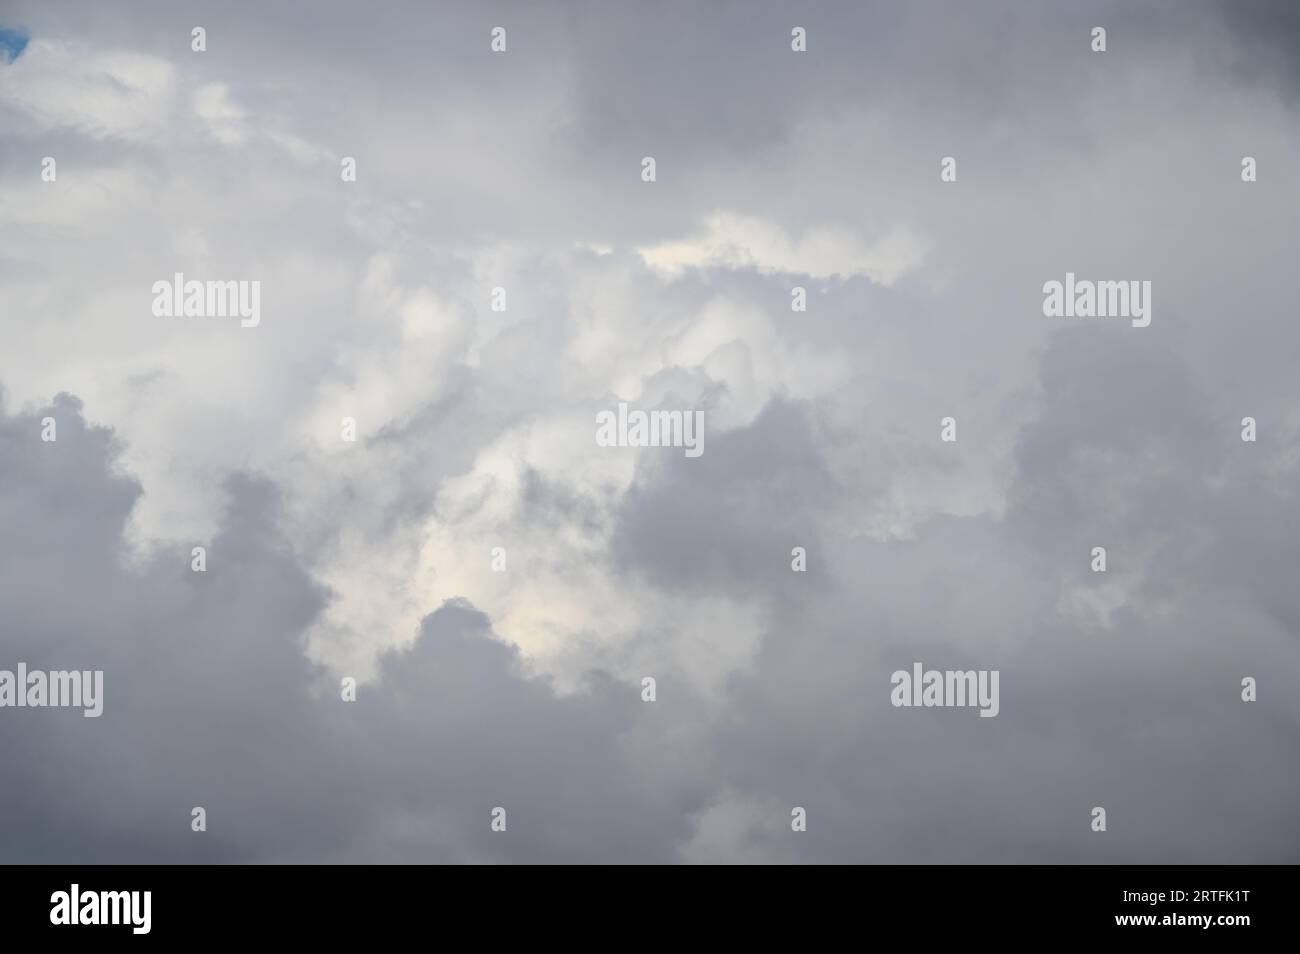 Dynamically changing and diverse layers of white clouds over the city. The clouds move quickly from left to right. Stock Photo